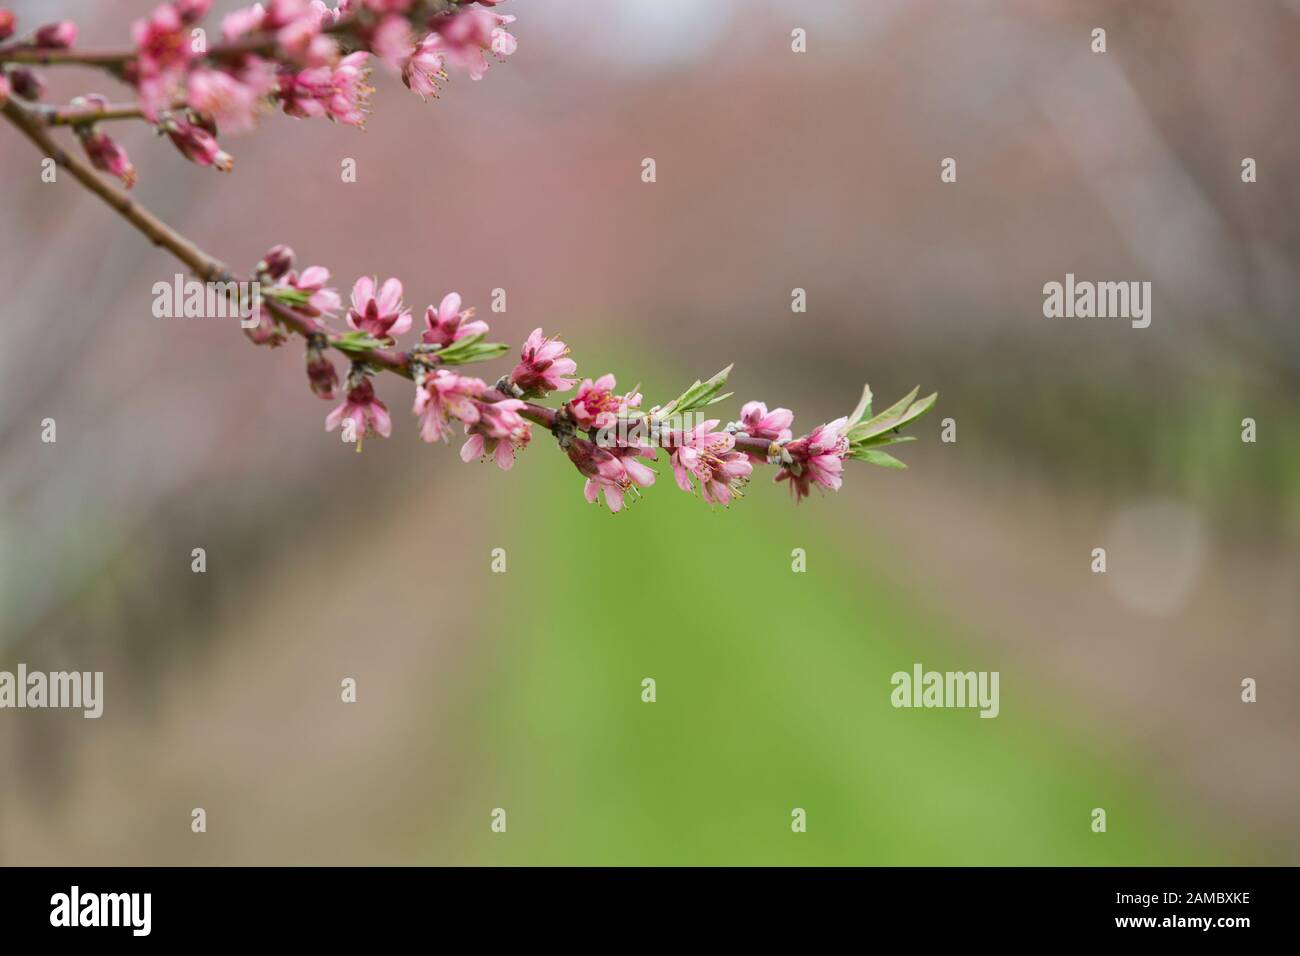 Close up go apple blossoms on a tree Stock Photo